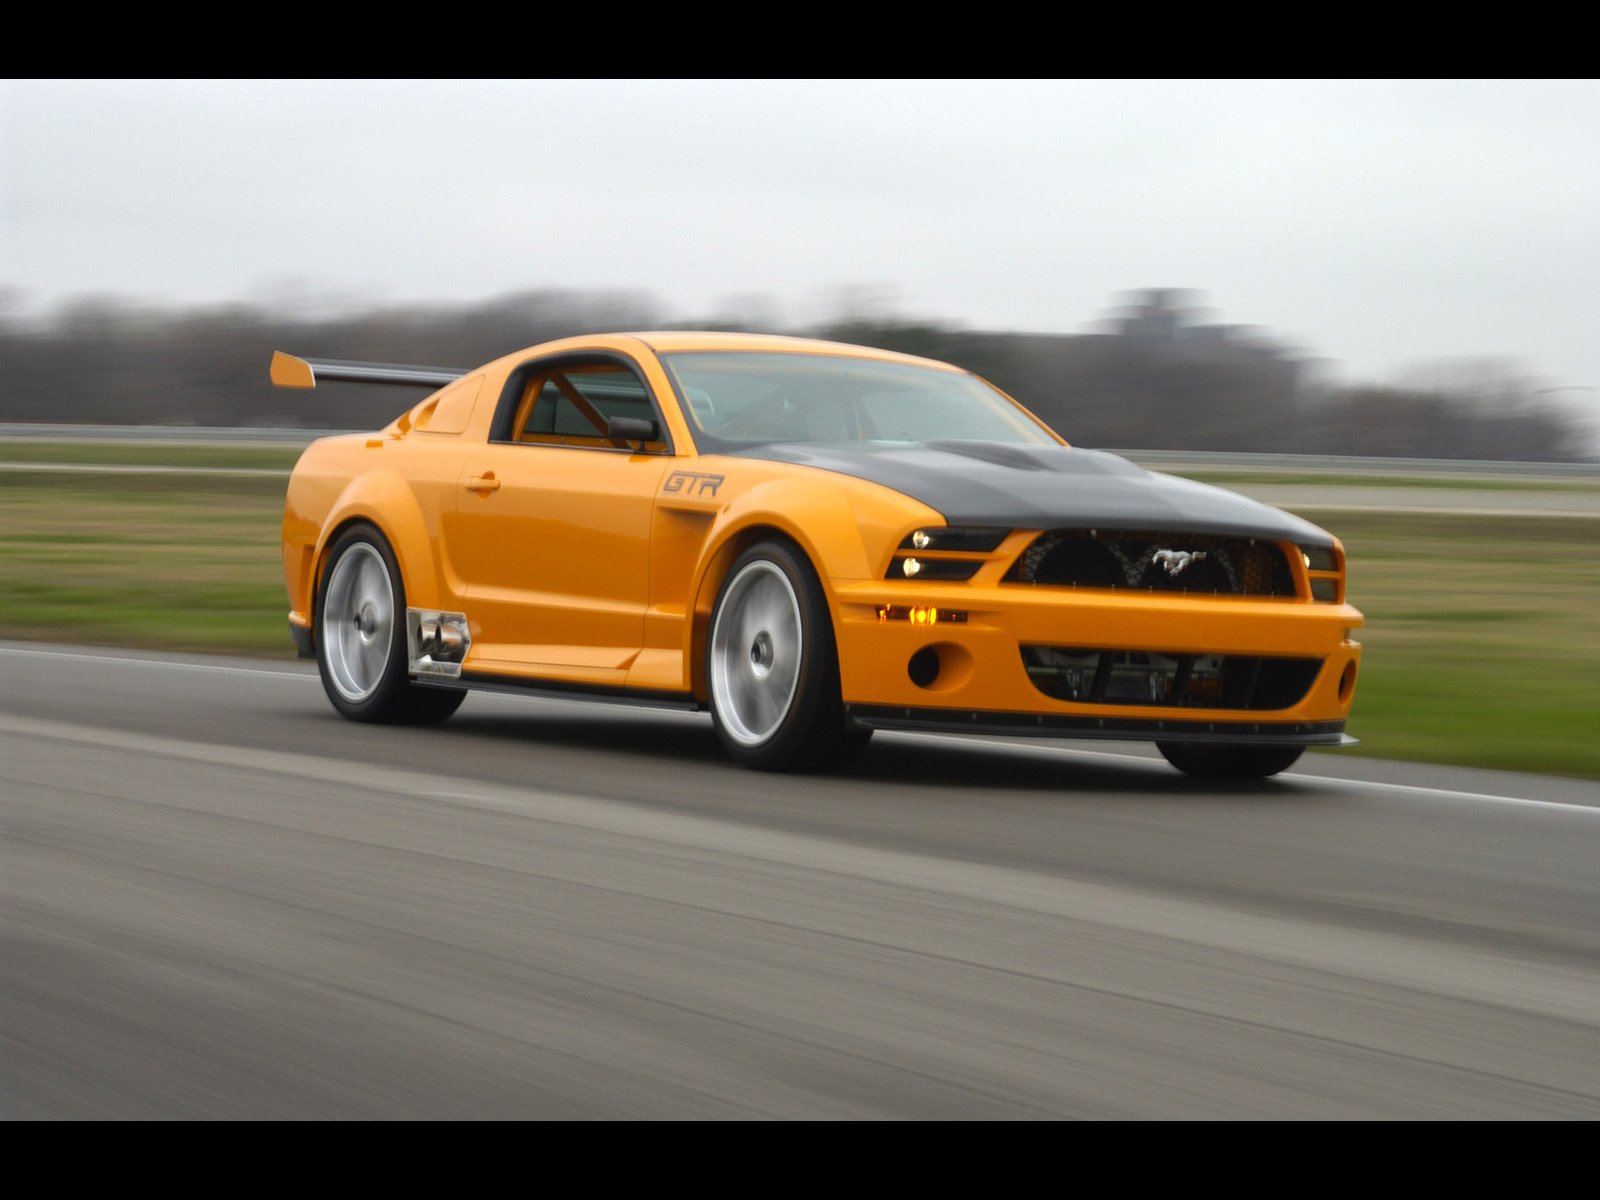 2004, Ford, Mustang, Gt r, Concept, Muscle, Supercar, Supercars Wallpaper